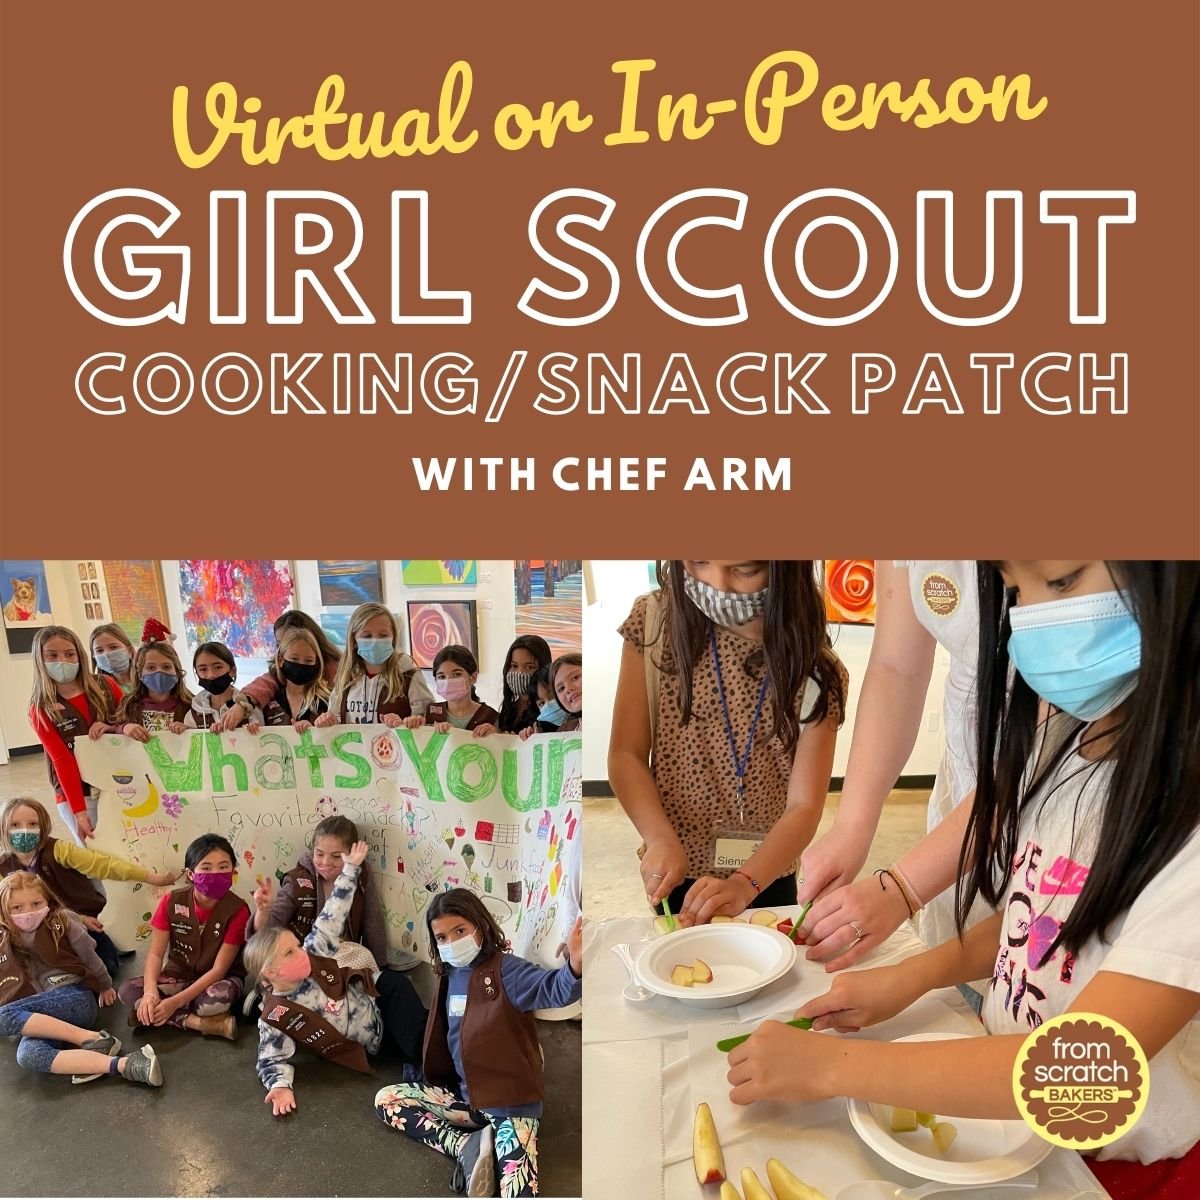 Girl Scouts Cooking.jpg